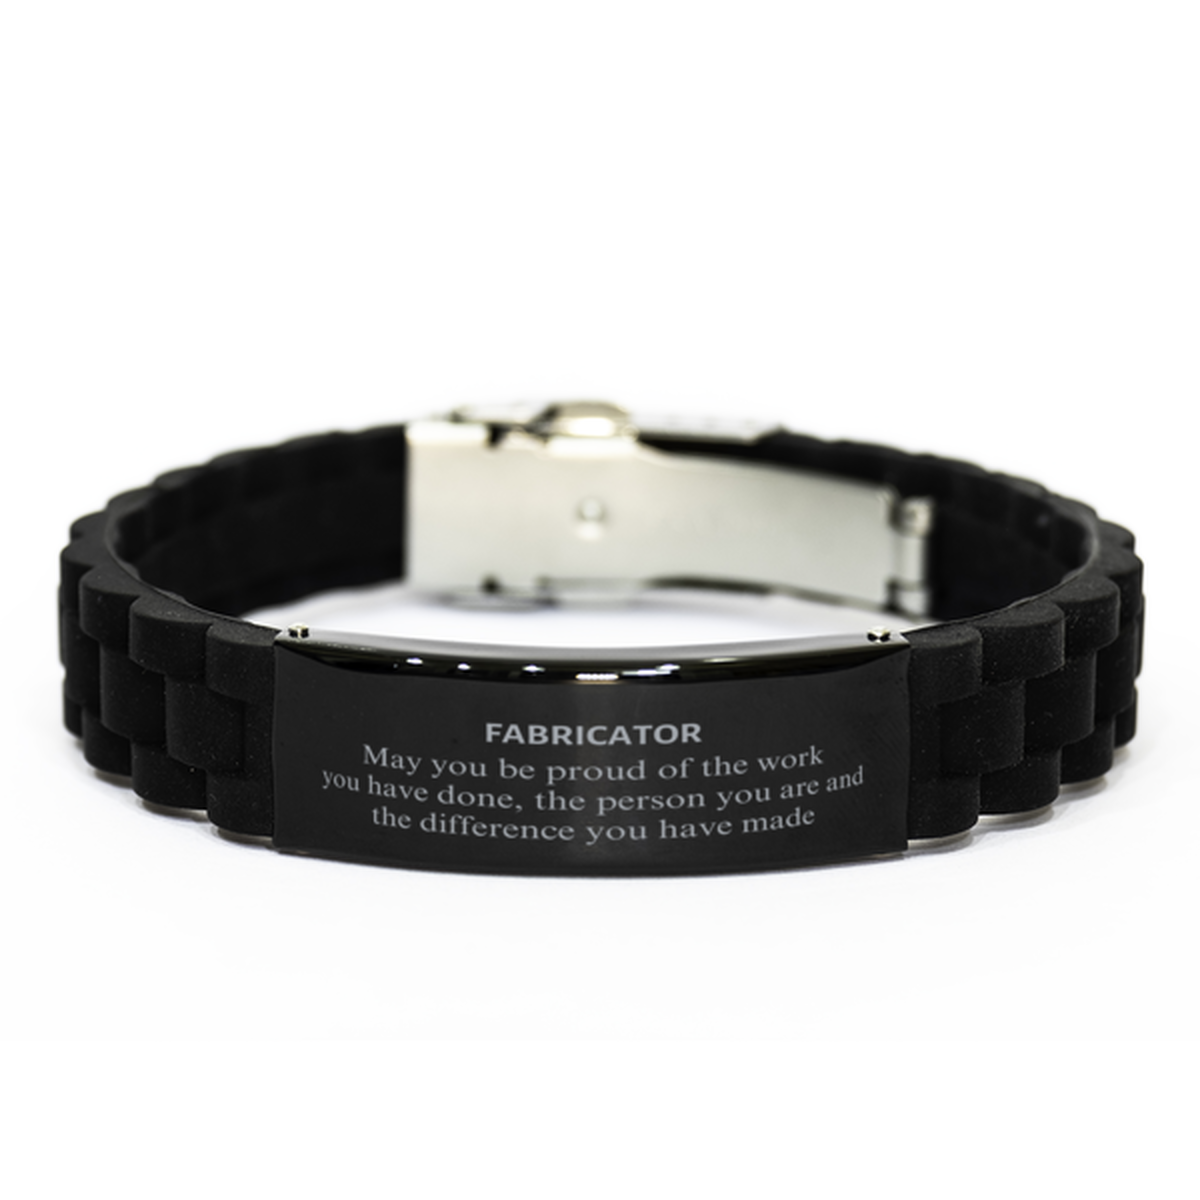 Fabricator May you be proud of the work you have done, Retirement Fabricator Black Glidelock Clasp Bracelet for Colleague Appreciation Gifts Amazing for Fabricator